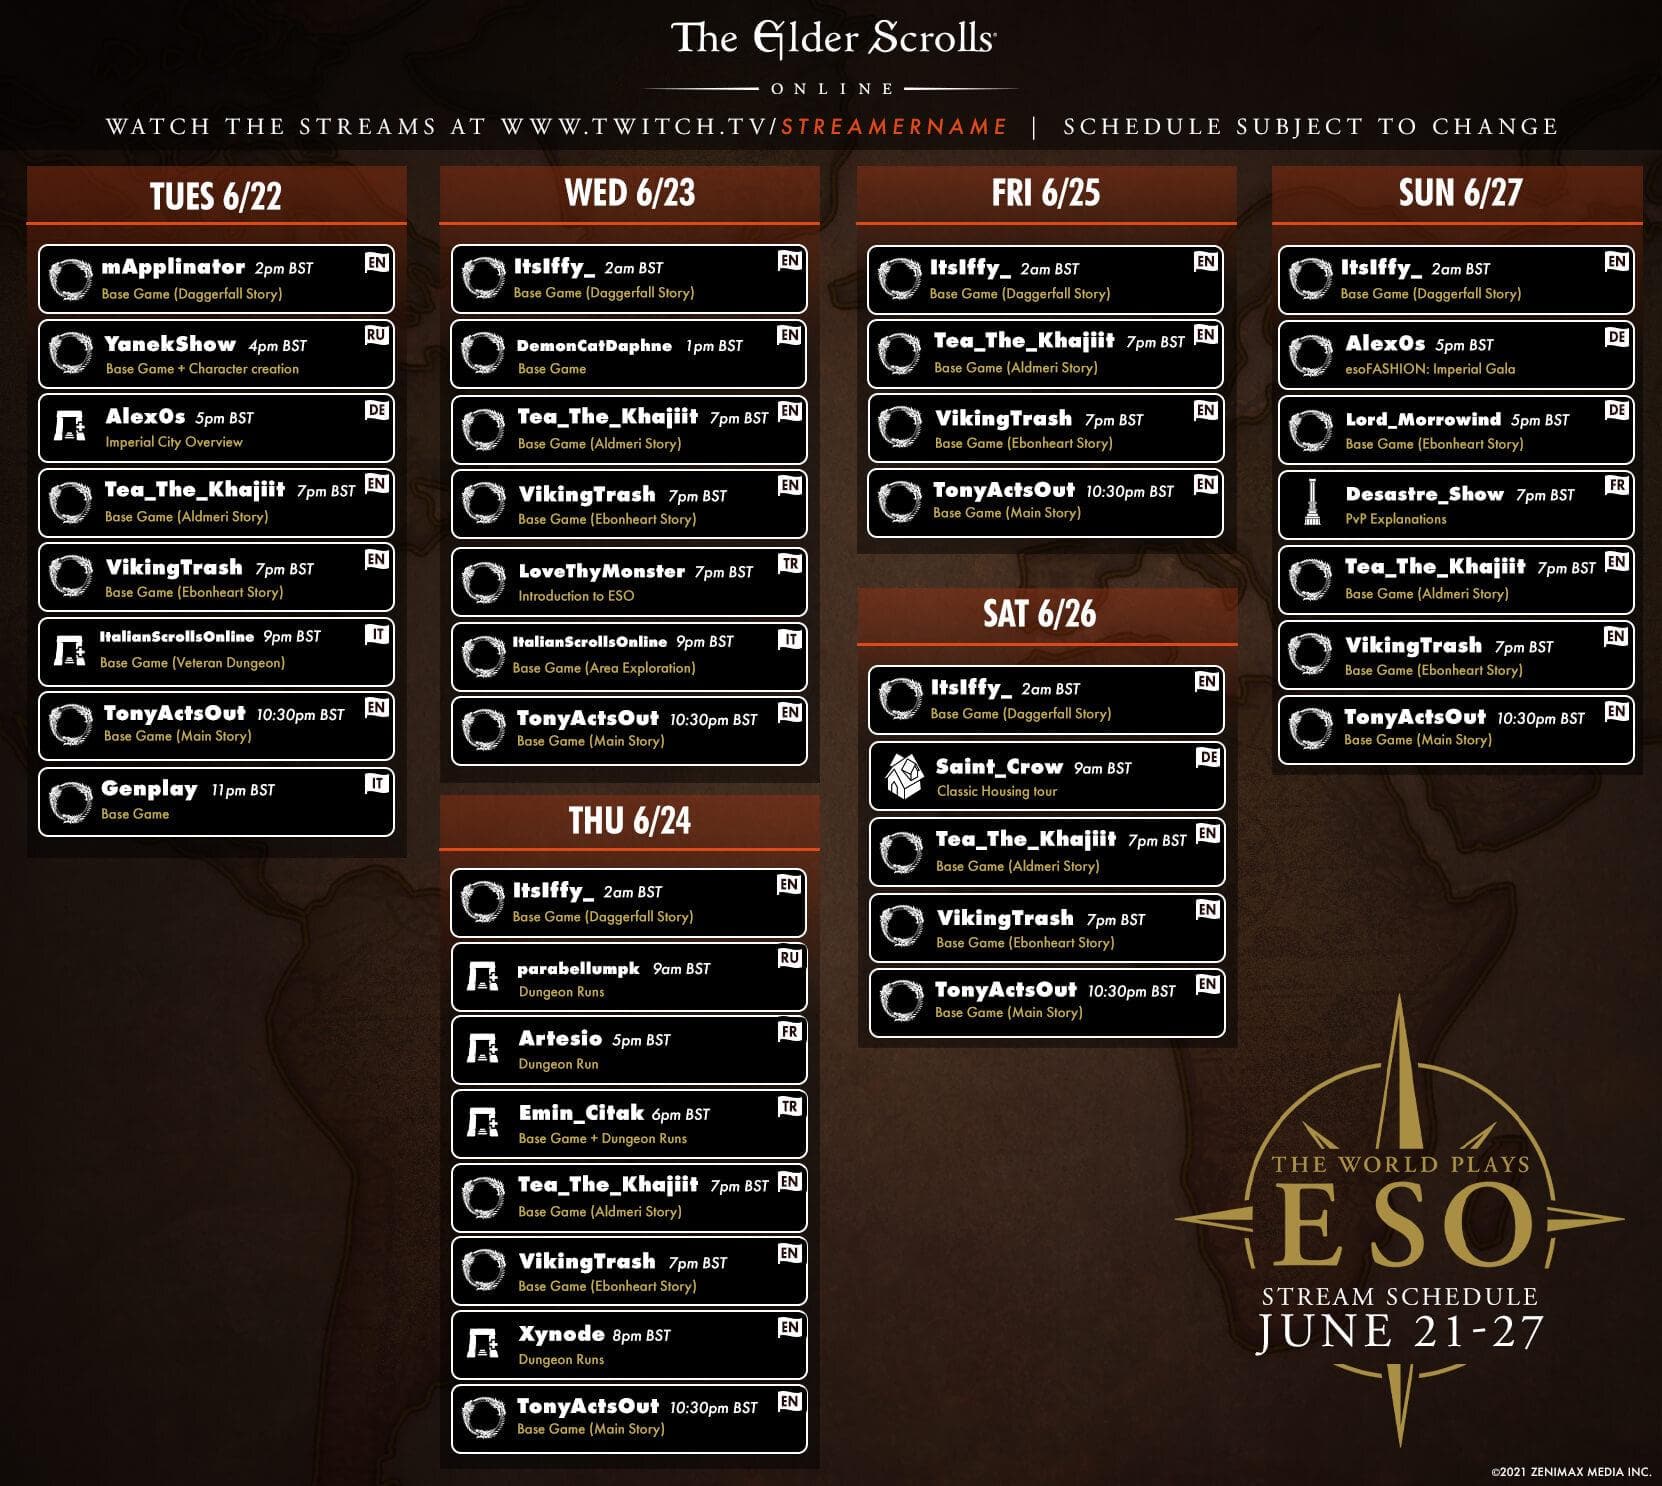 World Plays ESO Is Live! Check Out Our First Wave of Participants The